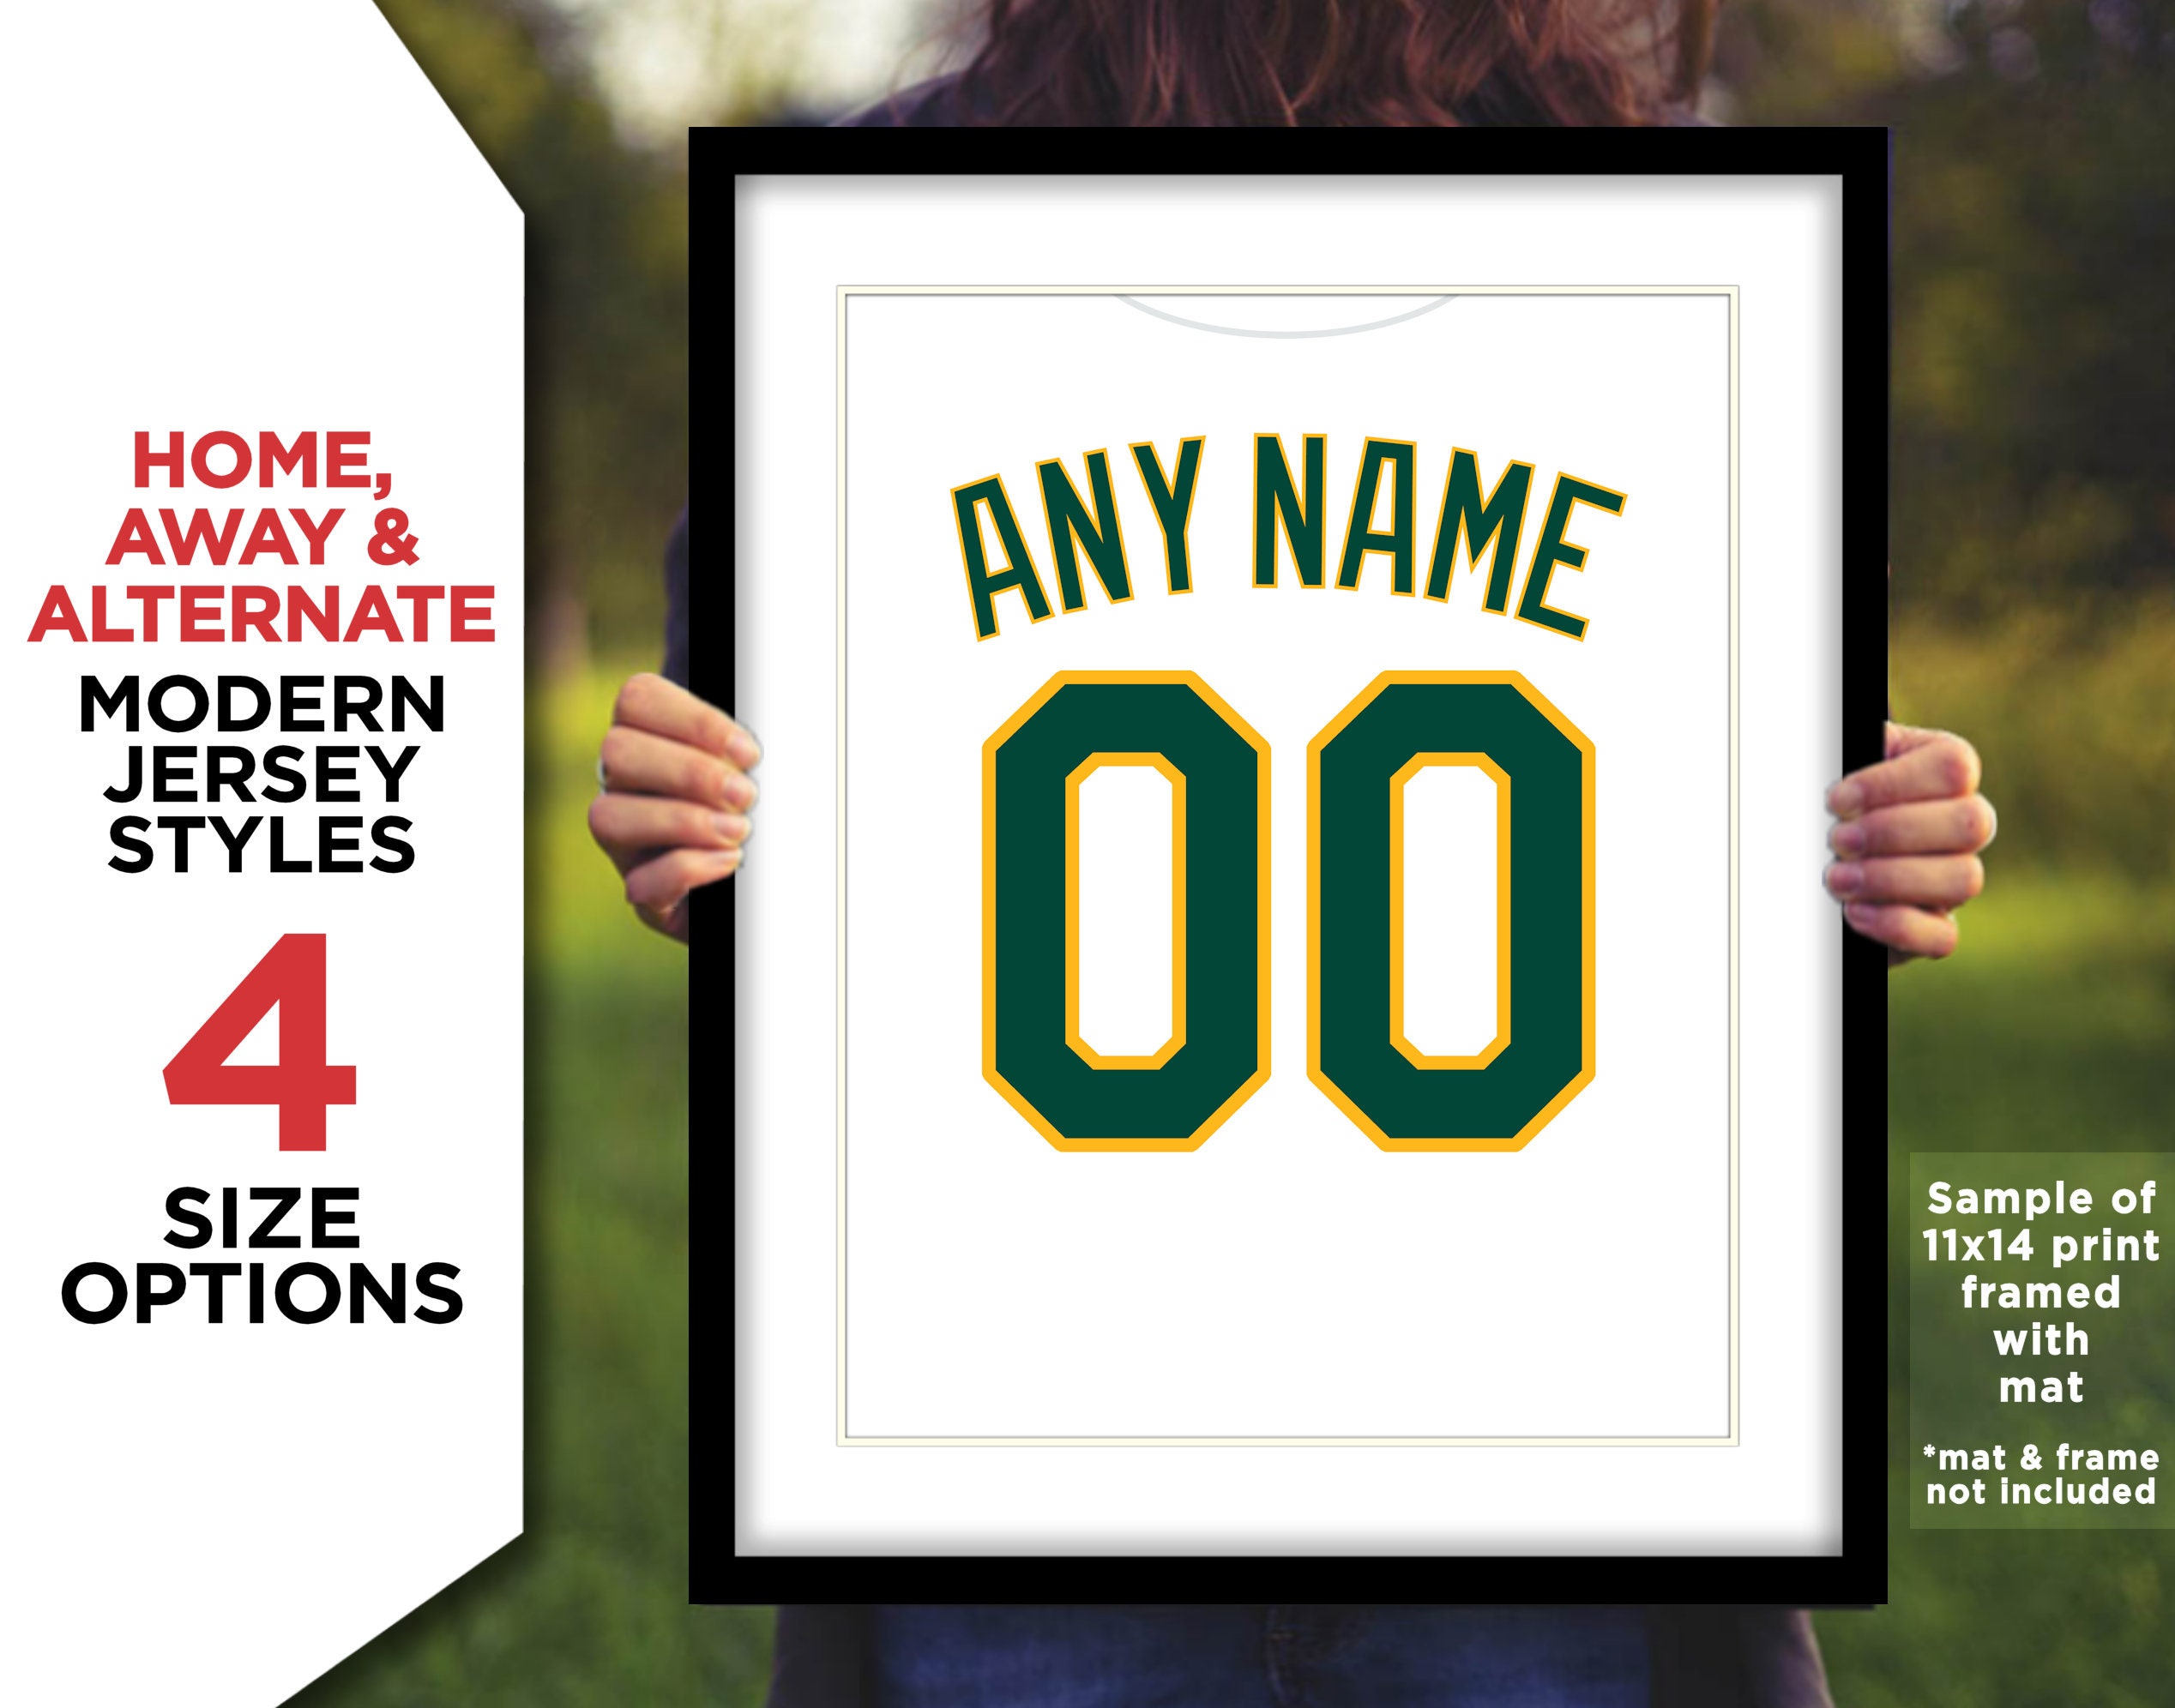 oakland athletics jersey numbers